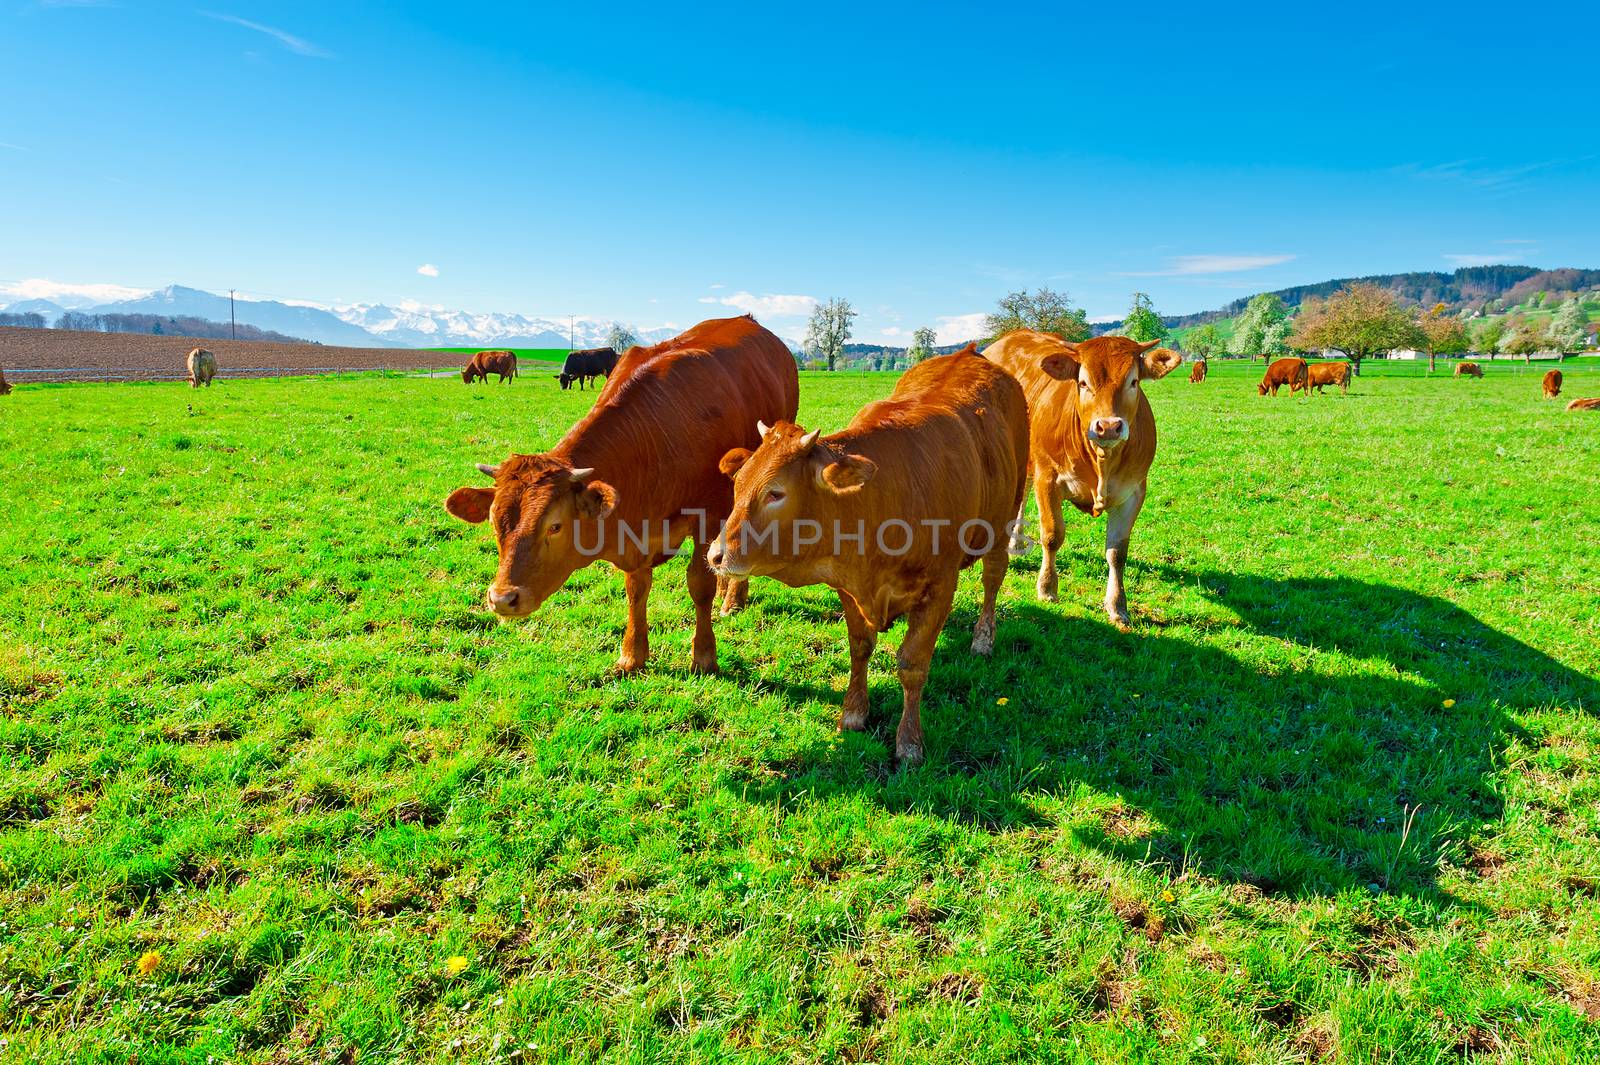 Cows Grazing on Green Pasture in Switzerland on the Background of Snow-capped Alps